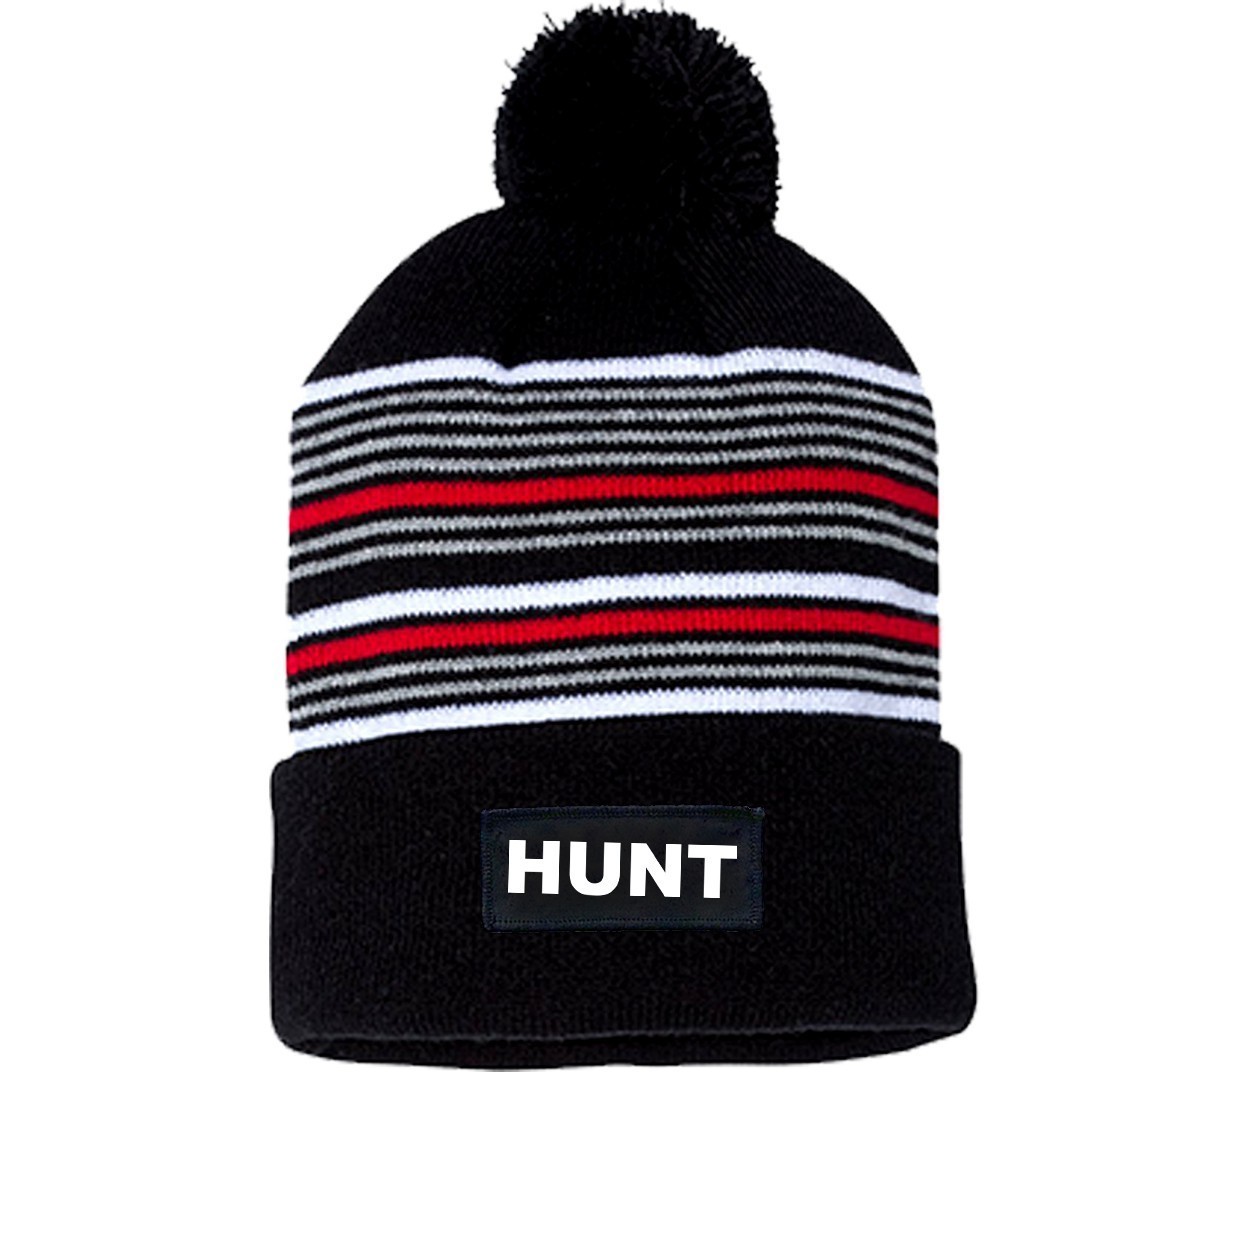 Hunt Brand Logo Night Out Woven Patch Roll Up Pom Knit Beanie Black/ White/ Grey/ Red Beanie (White Logo)